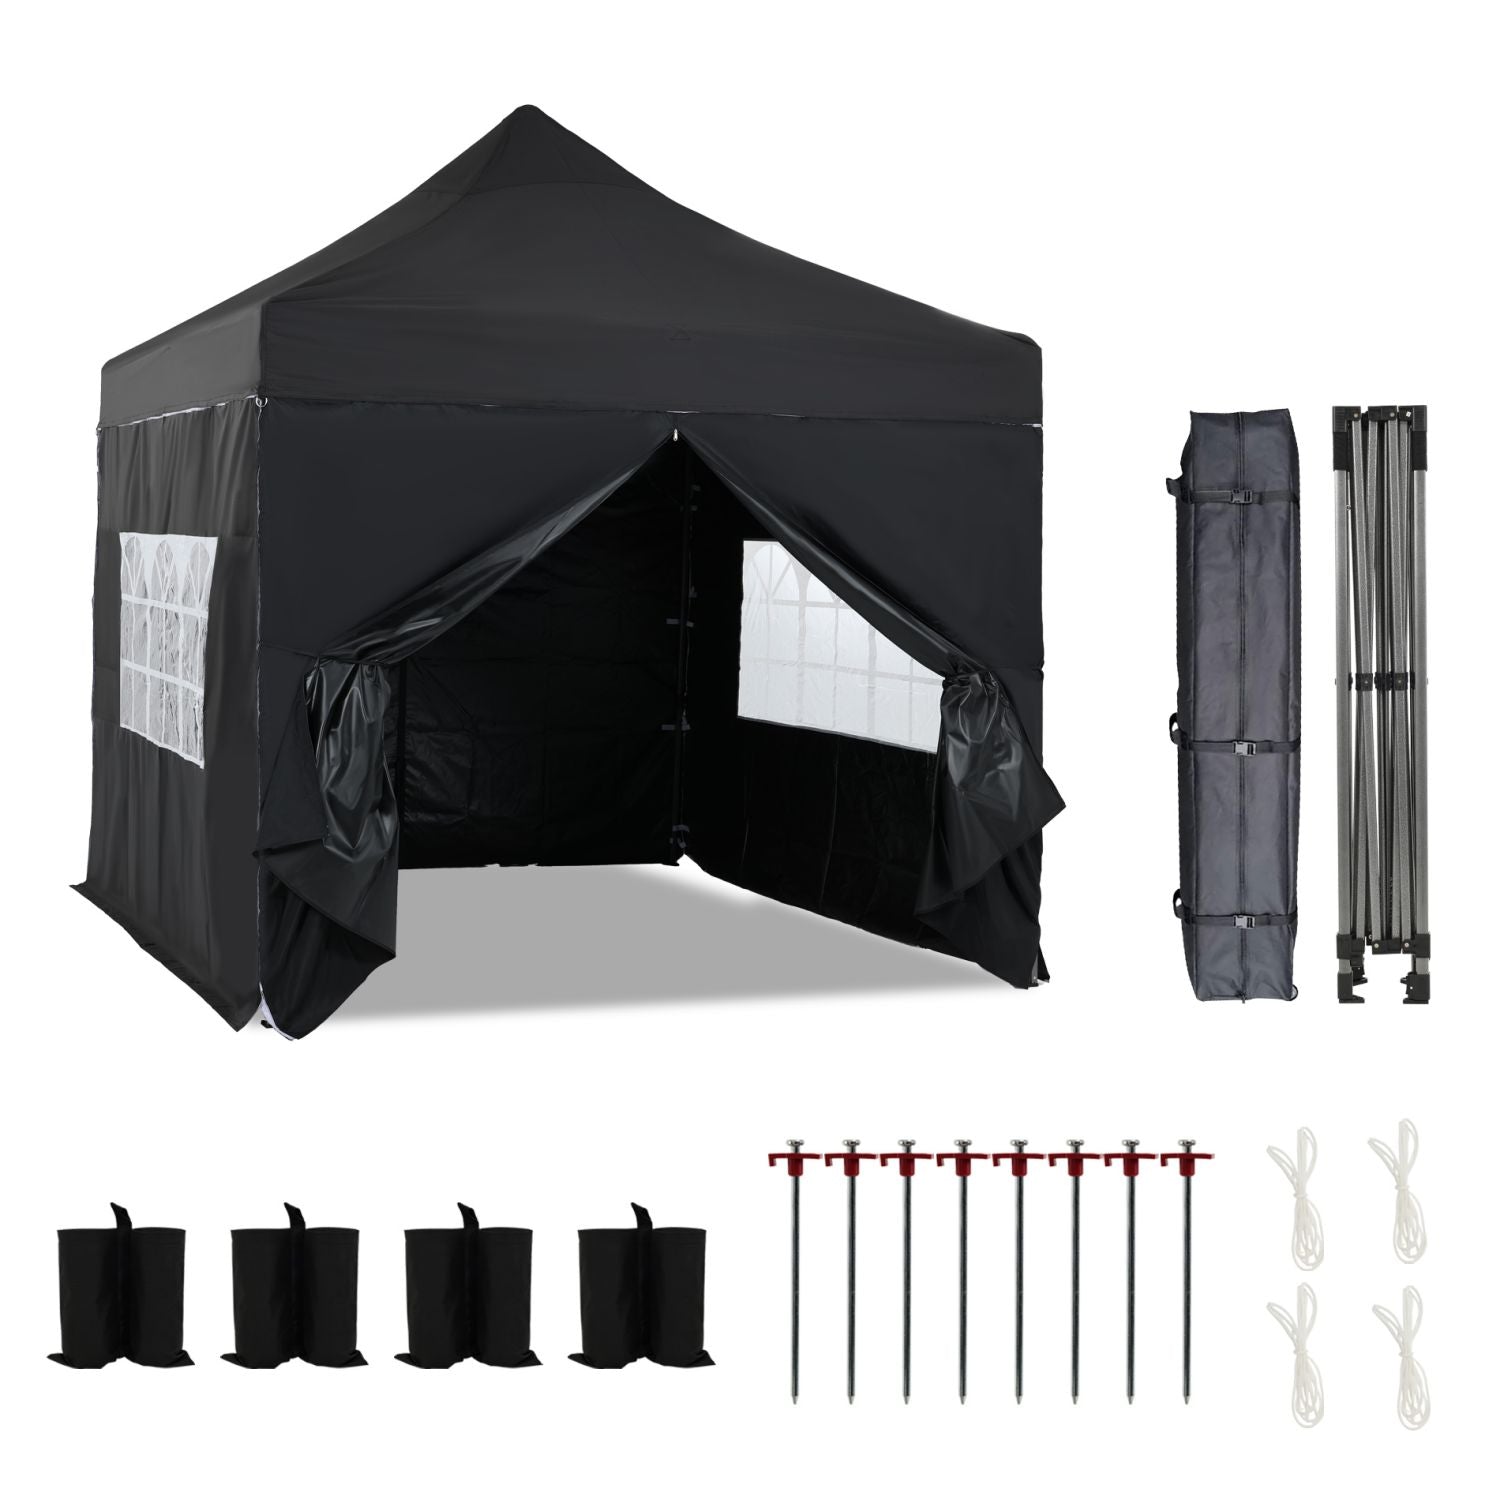 10 x 10 FT. Pop Up Canopy Tent with Windows Sidewalls, 3 Adjustable Heights, with Wheeled Bag  Aoodor  Black  